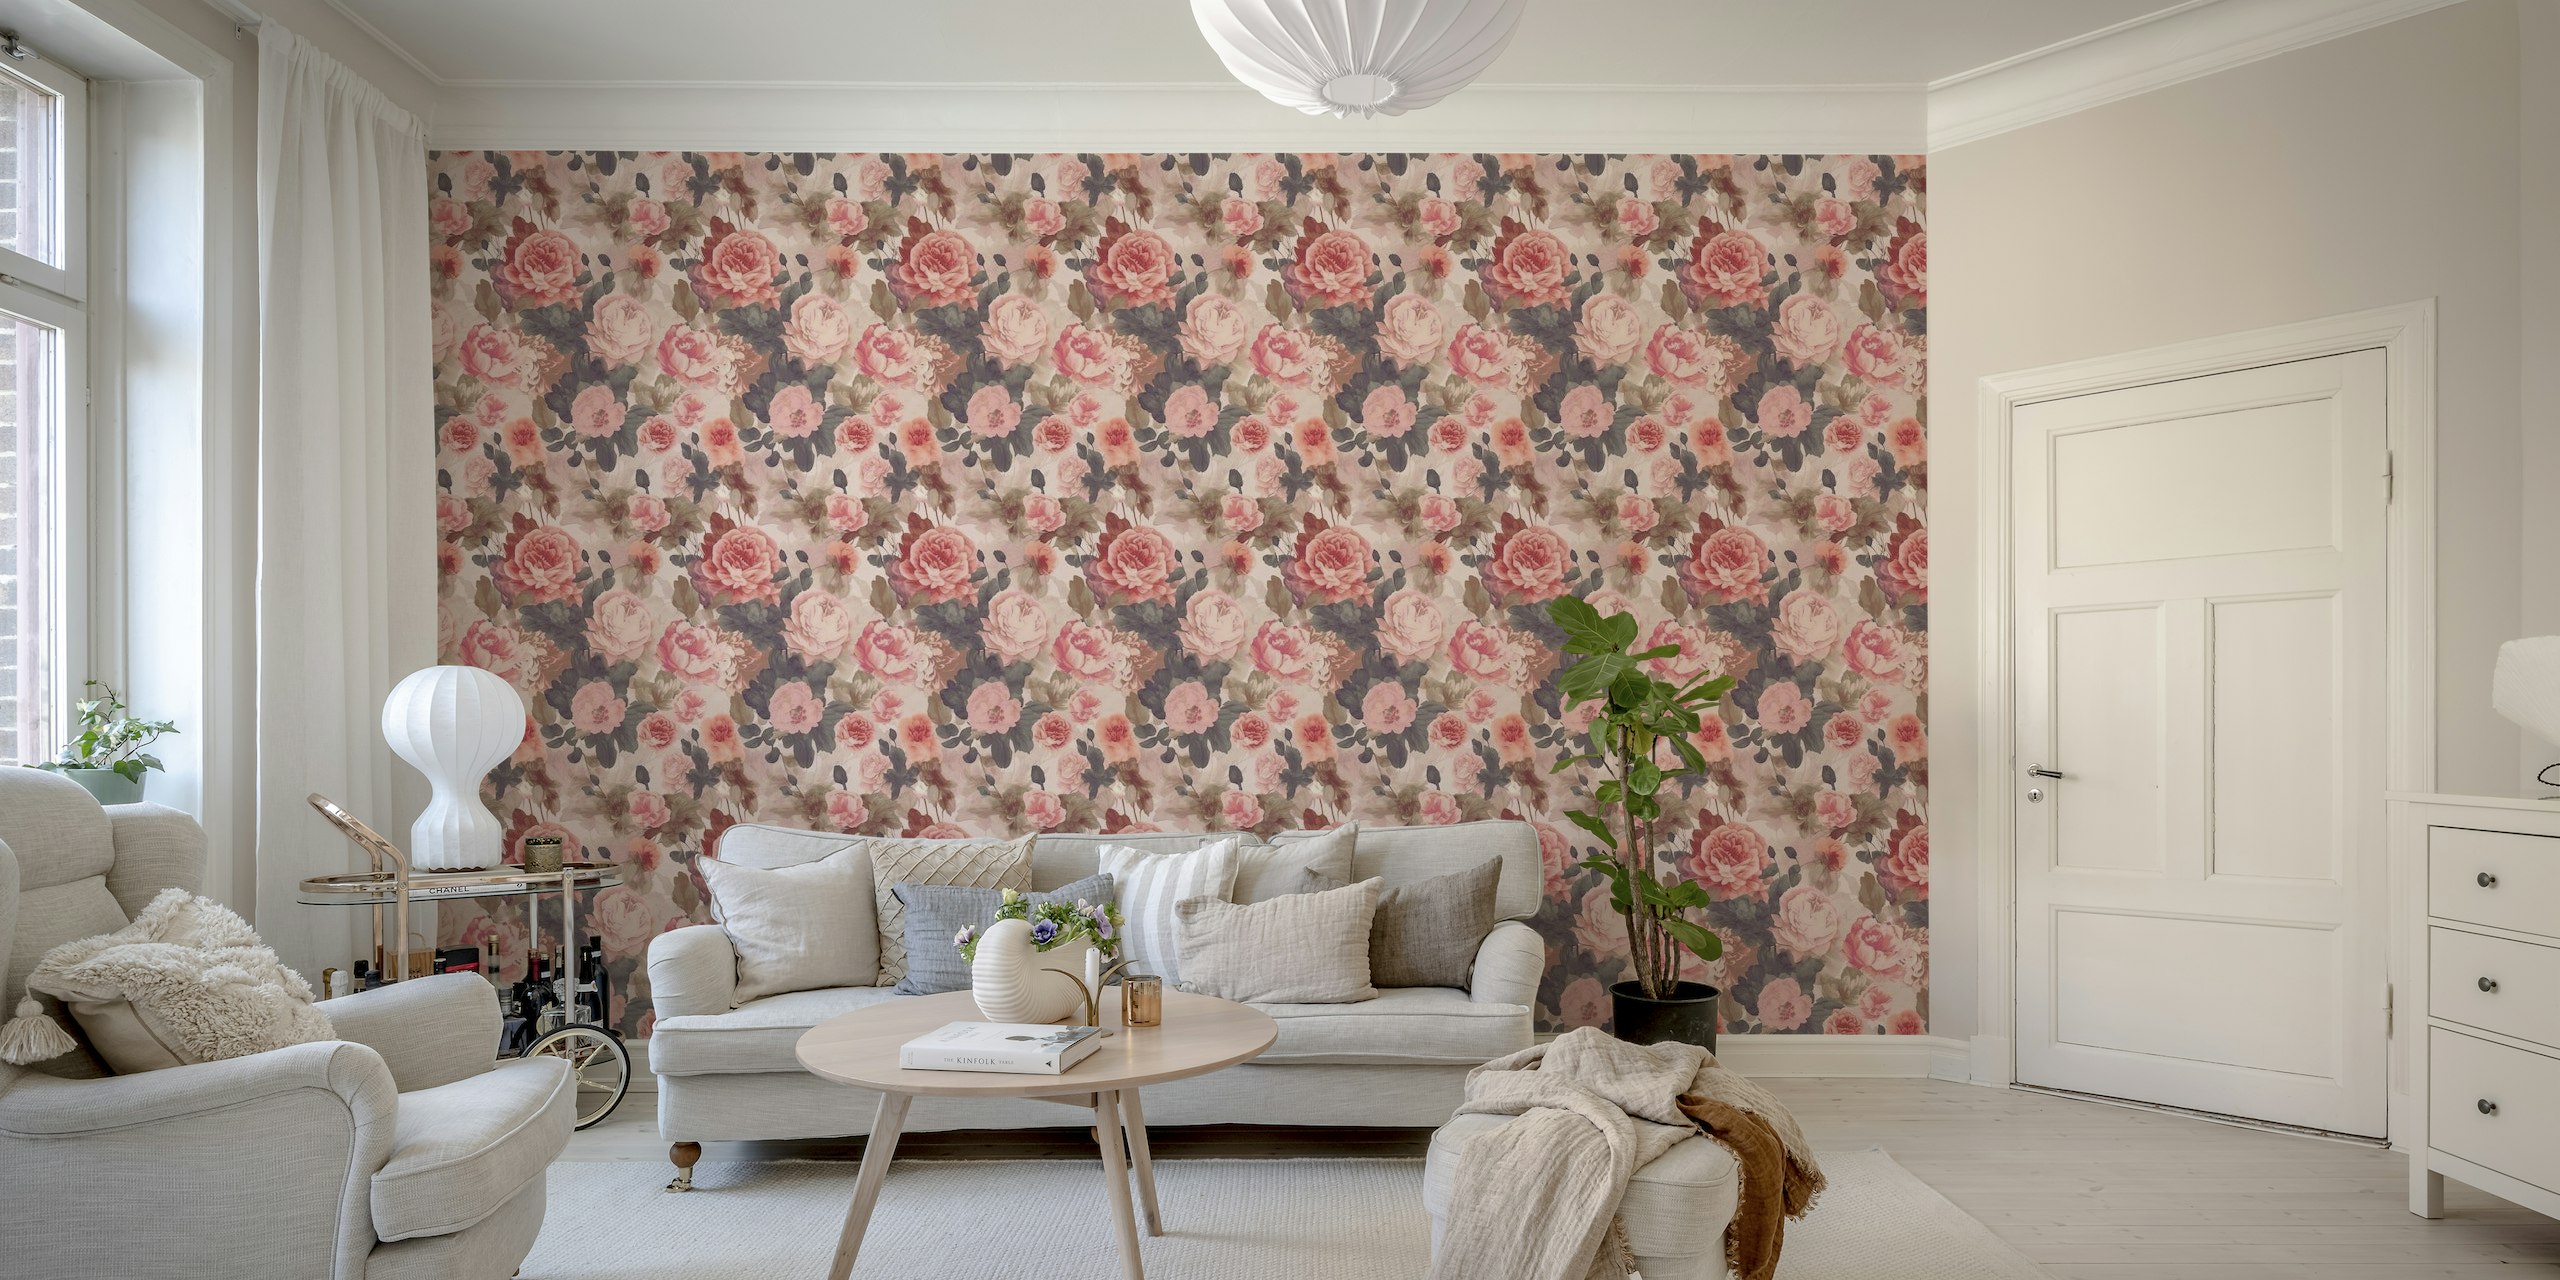 Baroque Roses Floral Nostalgia Design In Moody Pink Colors tapetit